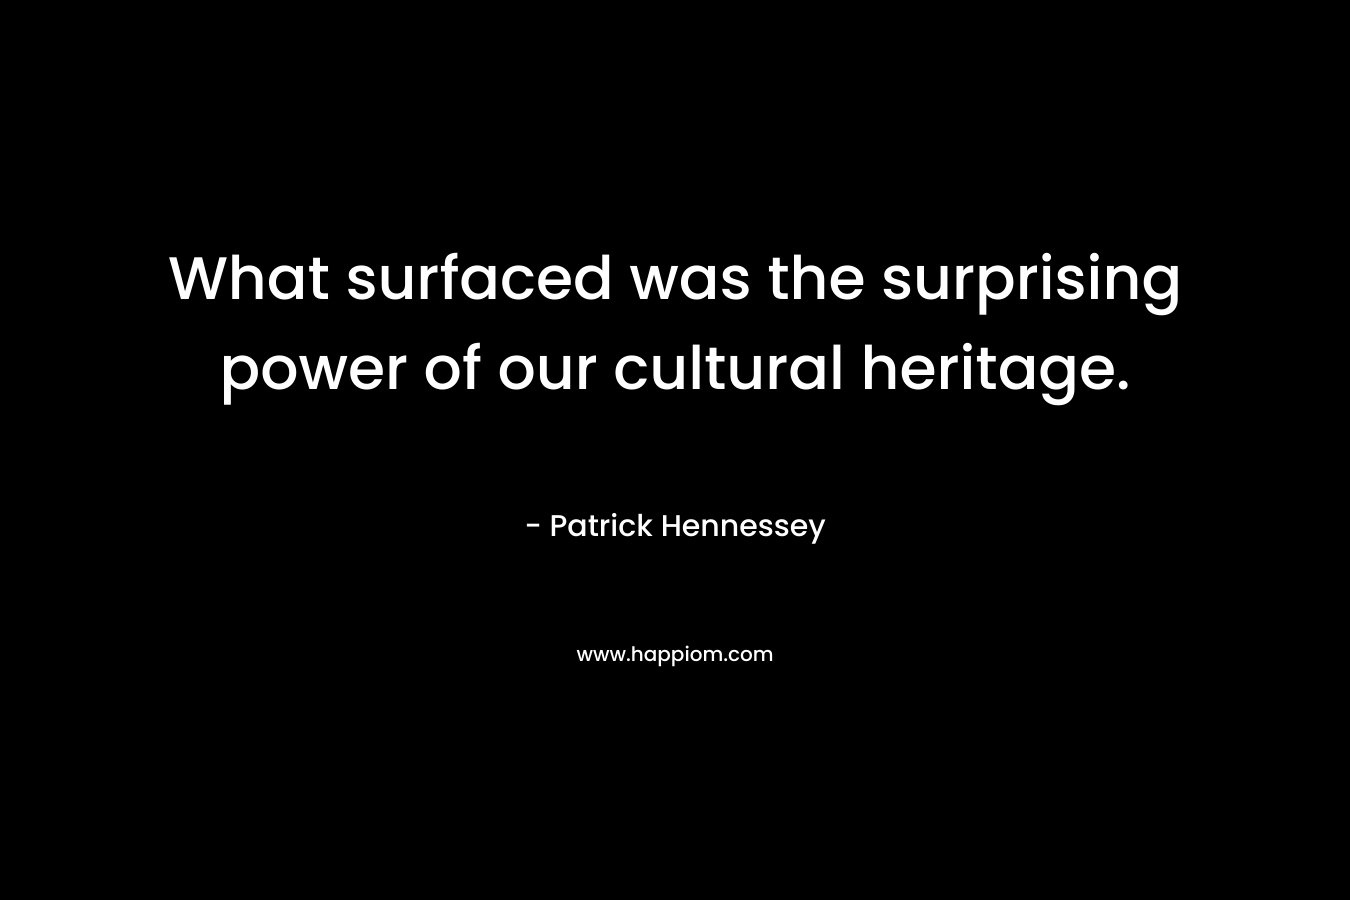 What surfaced was the surprising power of our cultural heritage. – Patrick Hennessey